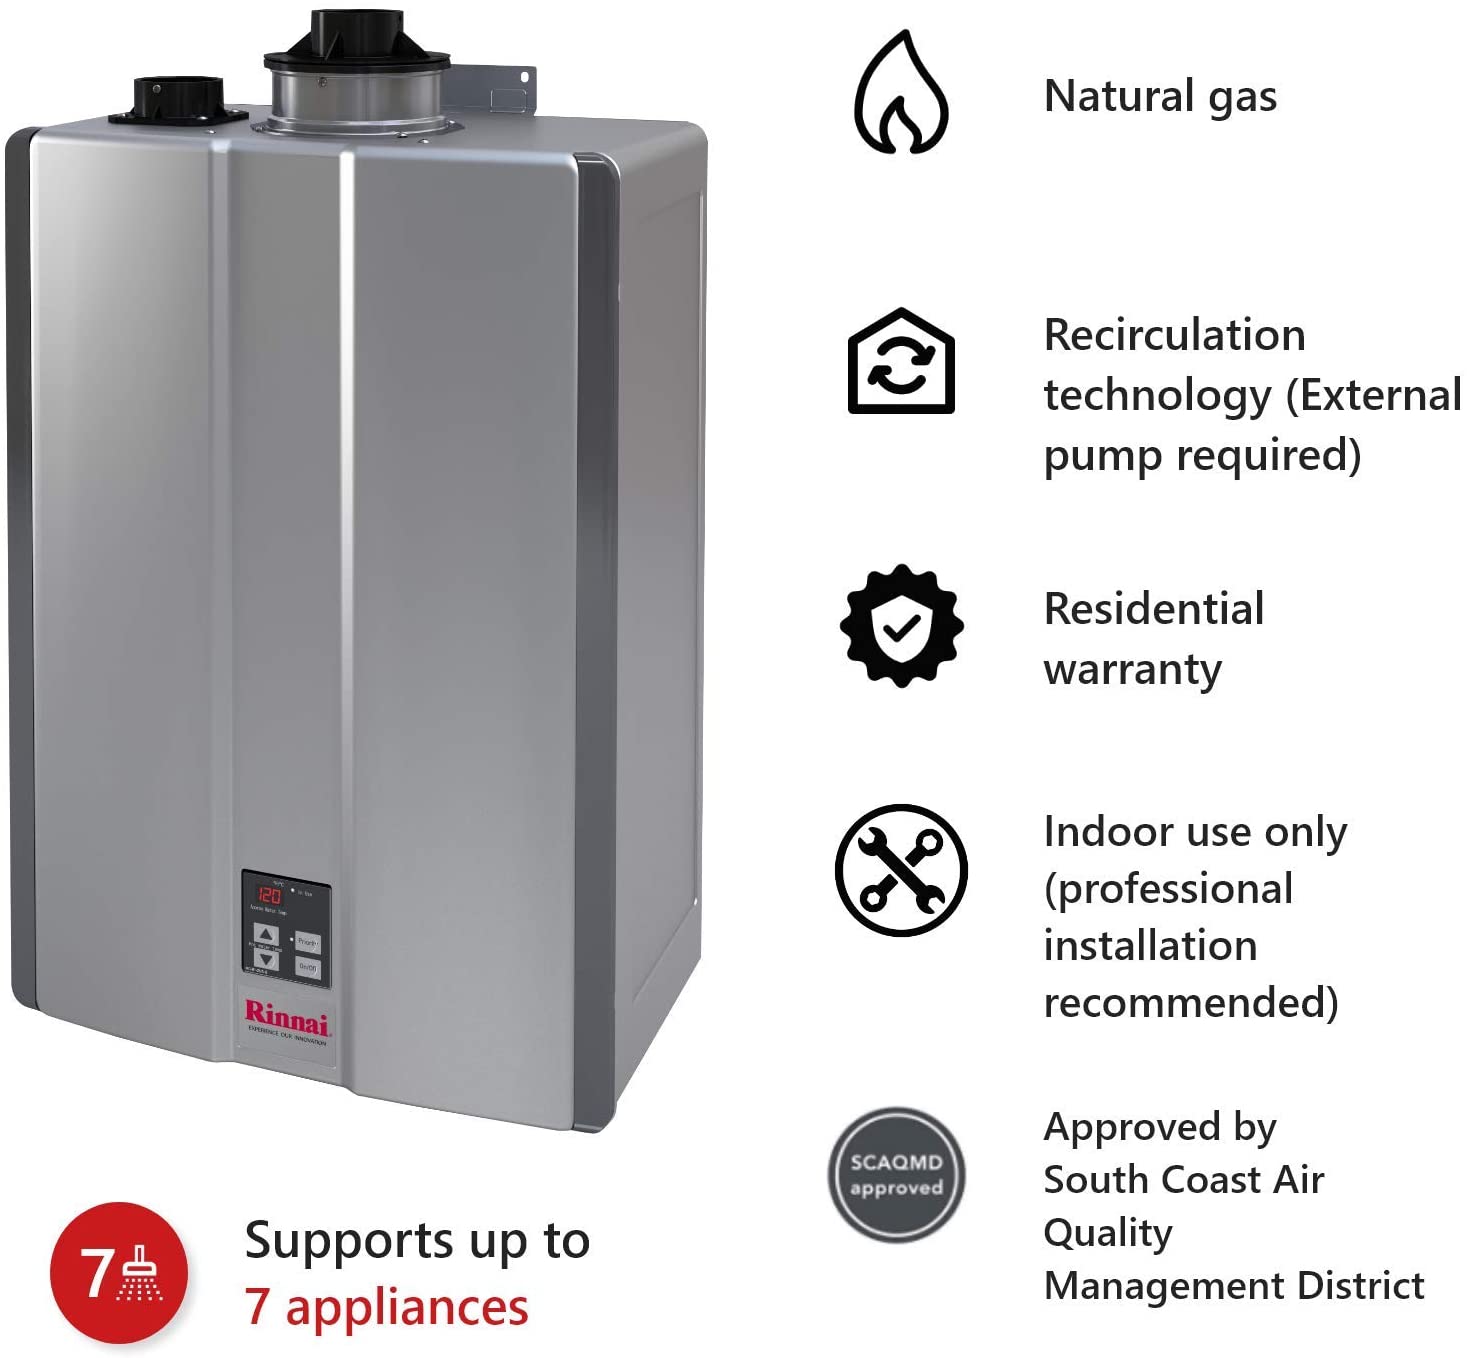 Rinnai, Rinnai RU180iN 10 GPM Indoor Whole Home Natural Gas Condensing Tankless Water Heater New